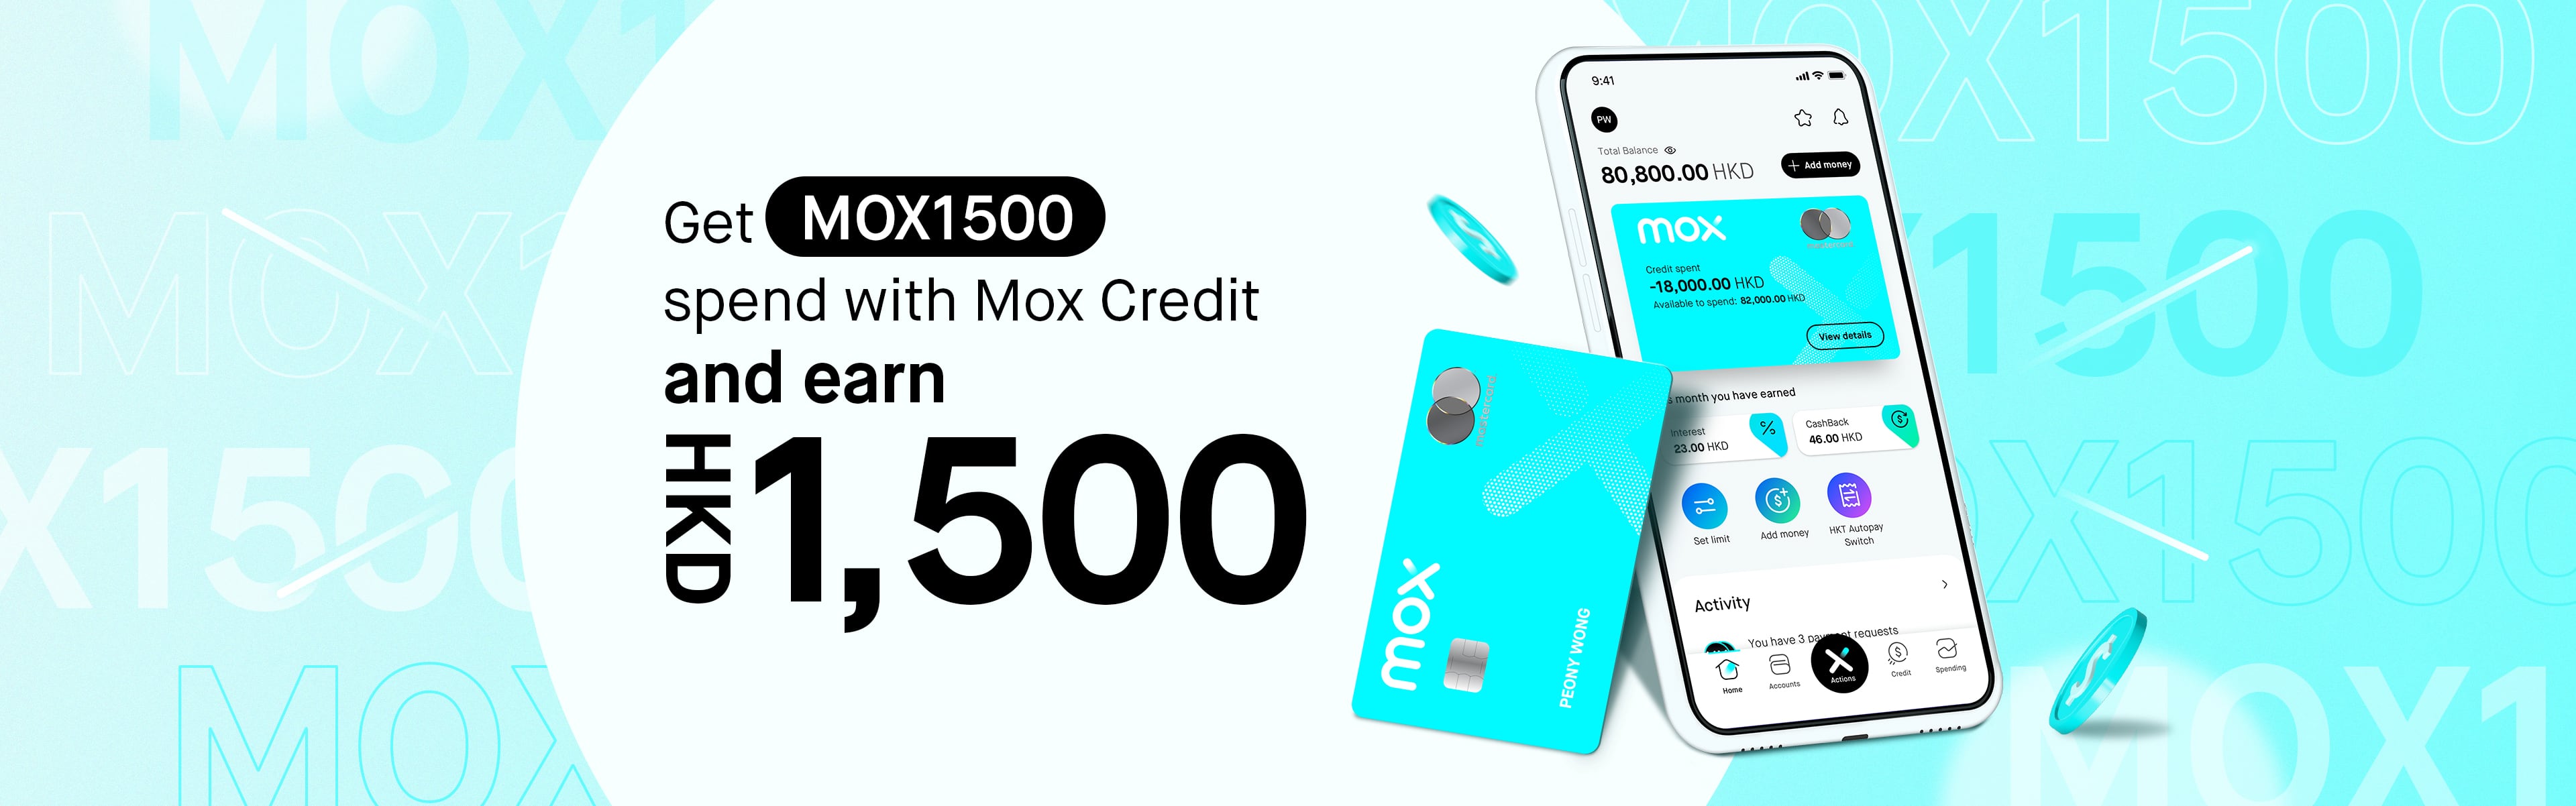 Get into shopping high this fall with MOX1500!